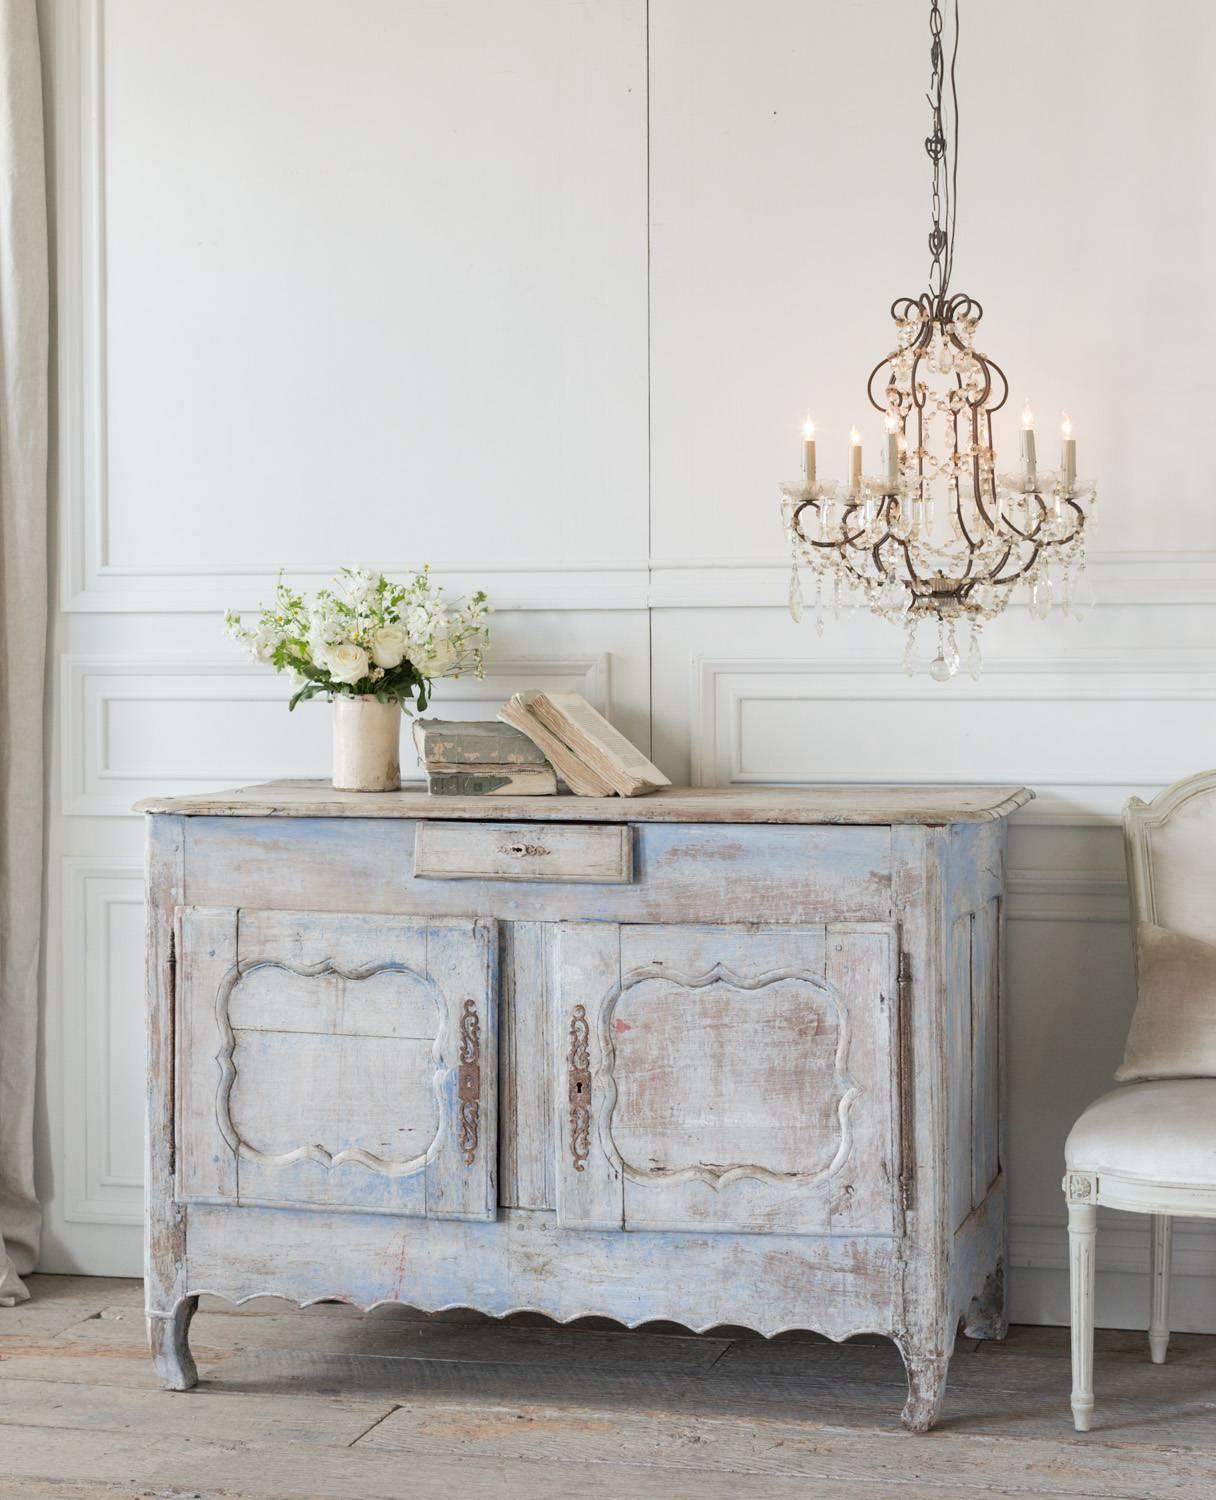 This sweet, two cupboard sideboard is washed in a powder blue and adds the perfect touch of farmhouse to any room. A cherubic little drawer, scalloped carvings, and original hardware set this piece apart from any others. Although the accompanying